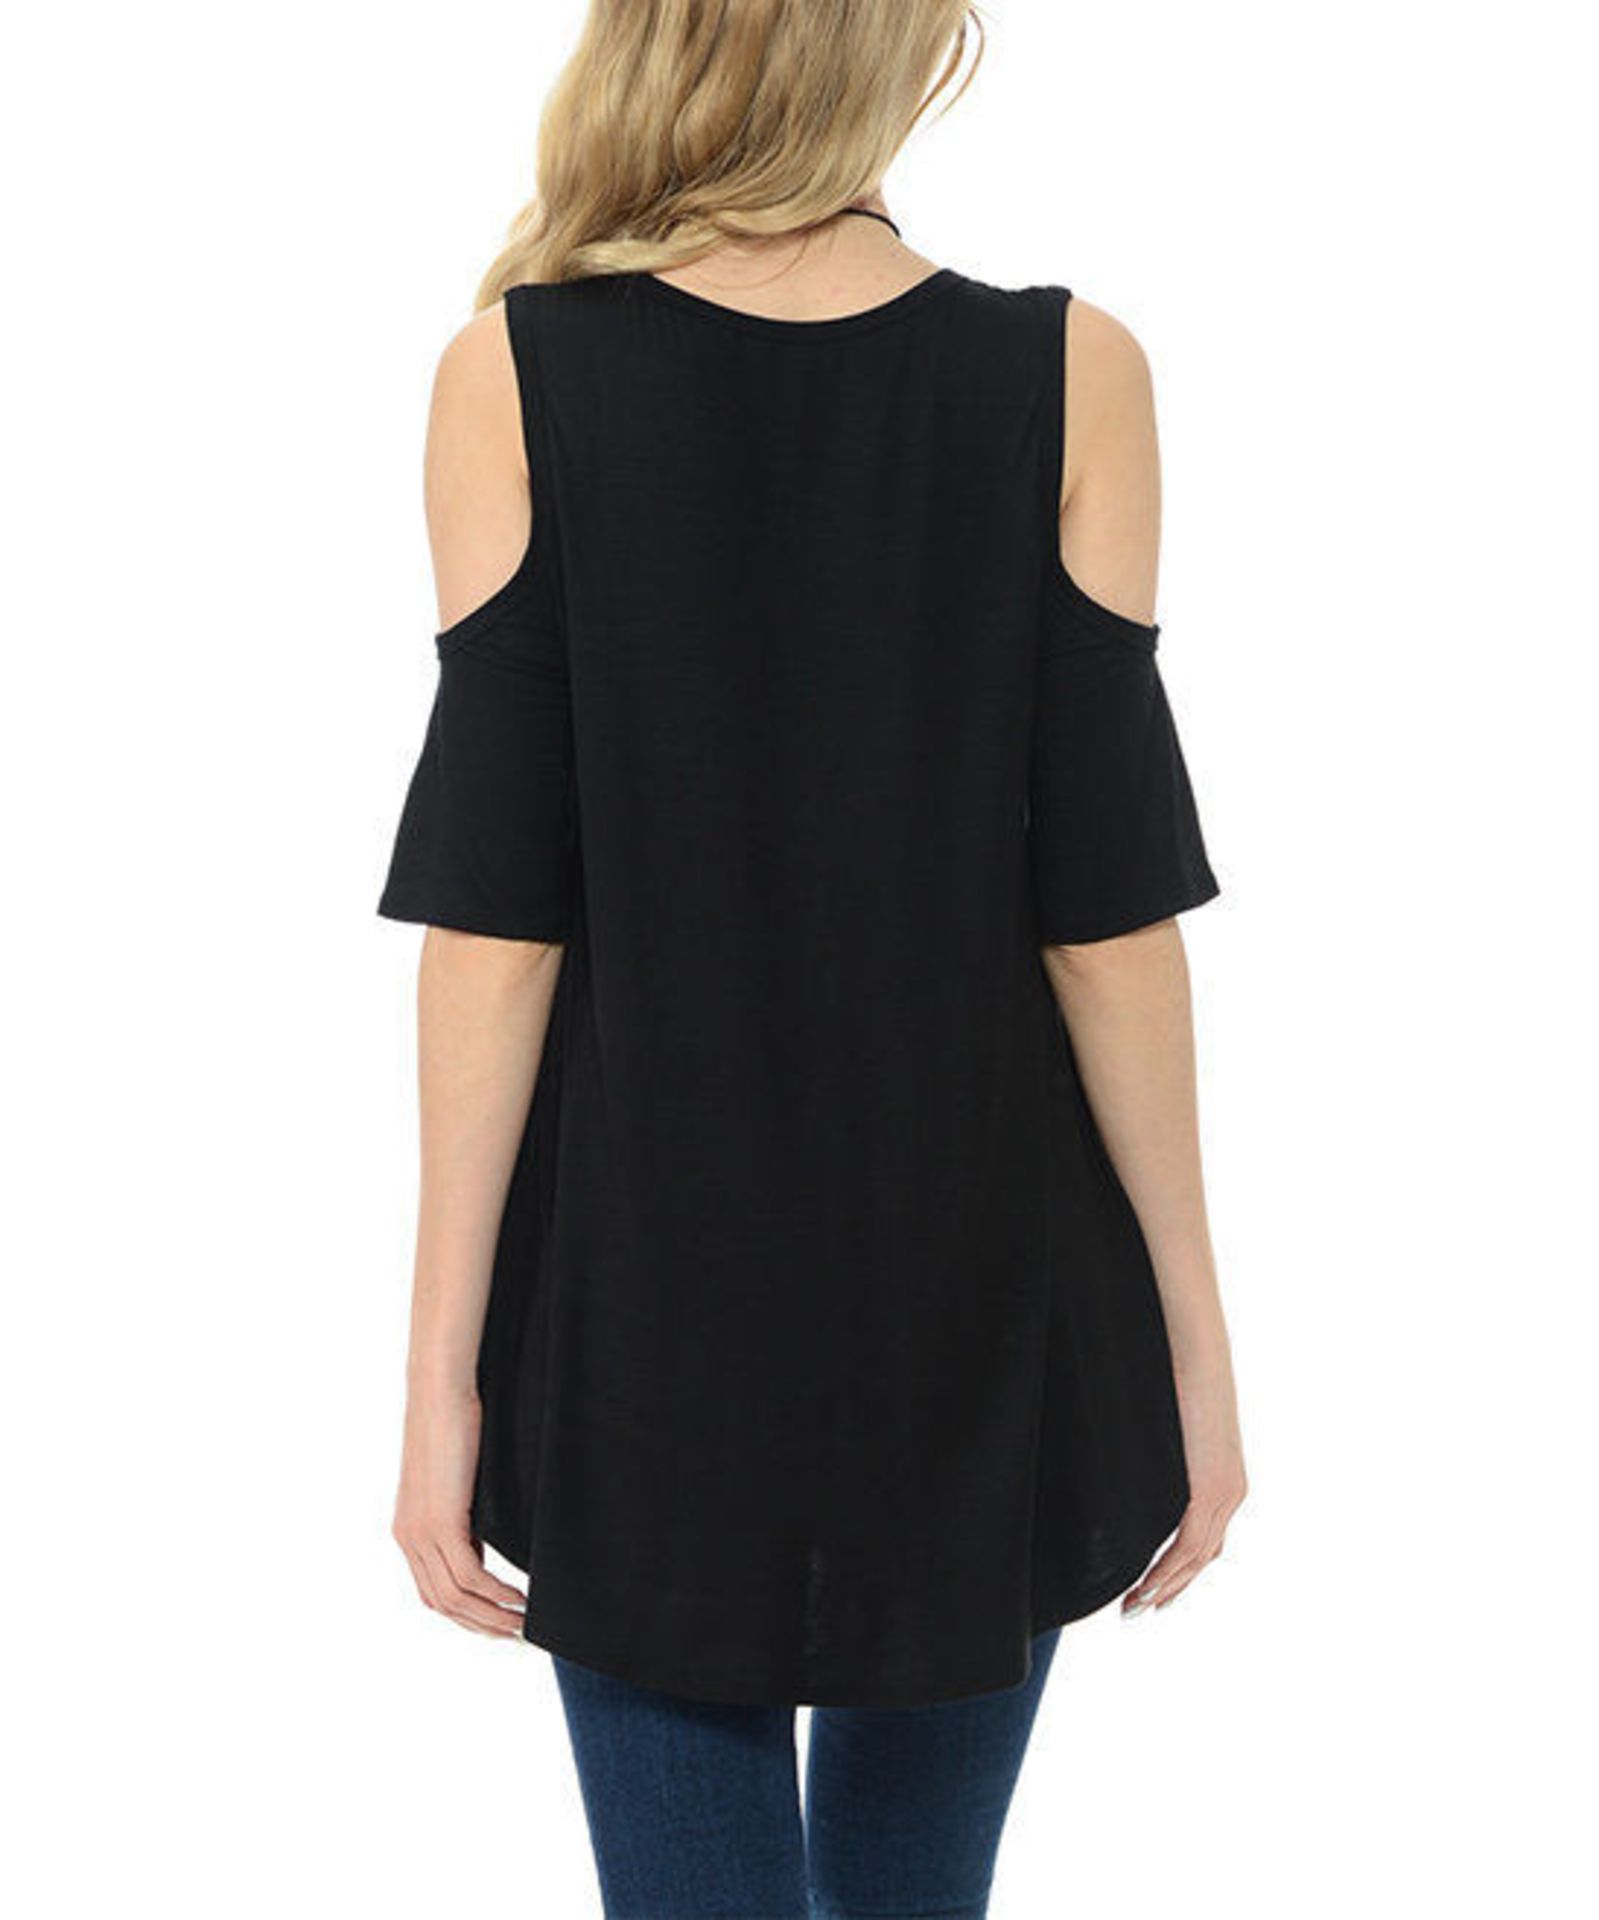 Cool Melon Black Cold-Shoulder Top (Us 18/Uk 22/Eu 50) (New With Tags) [Ref: 46366634-T-54] - Image 2 of 3